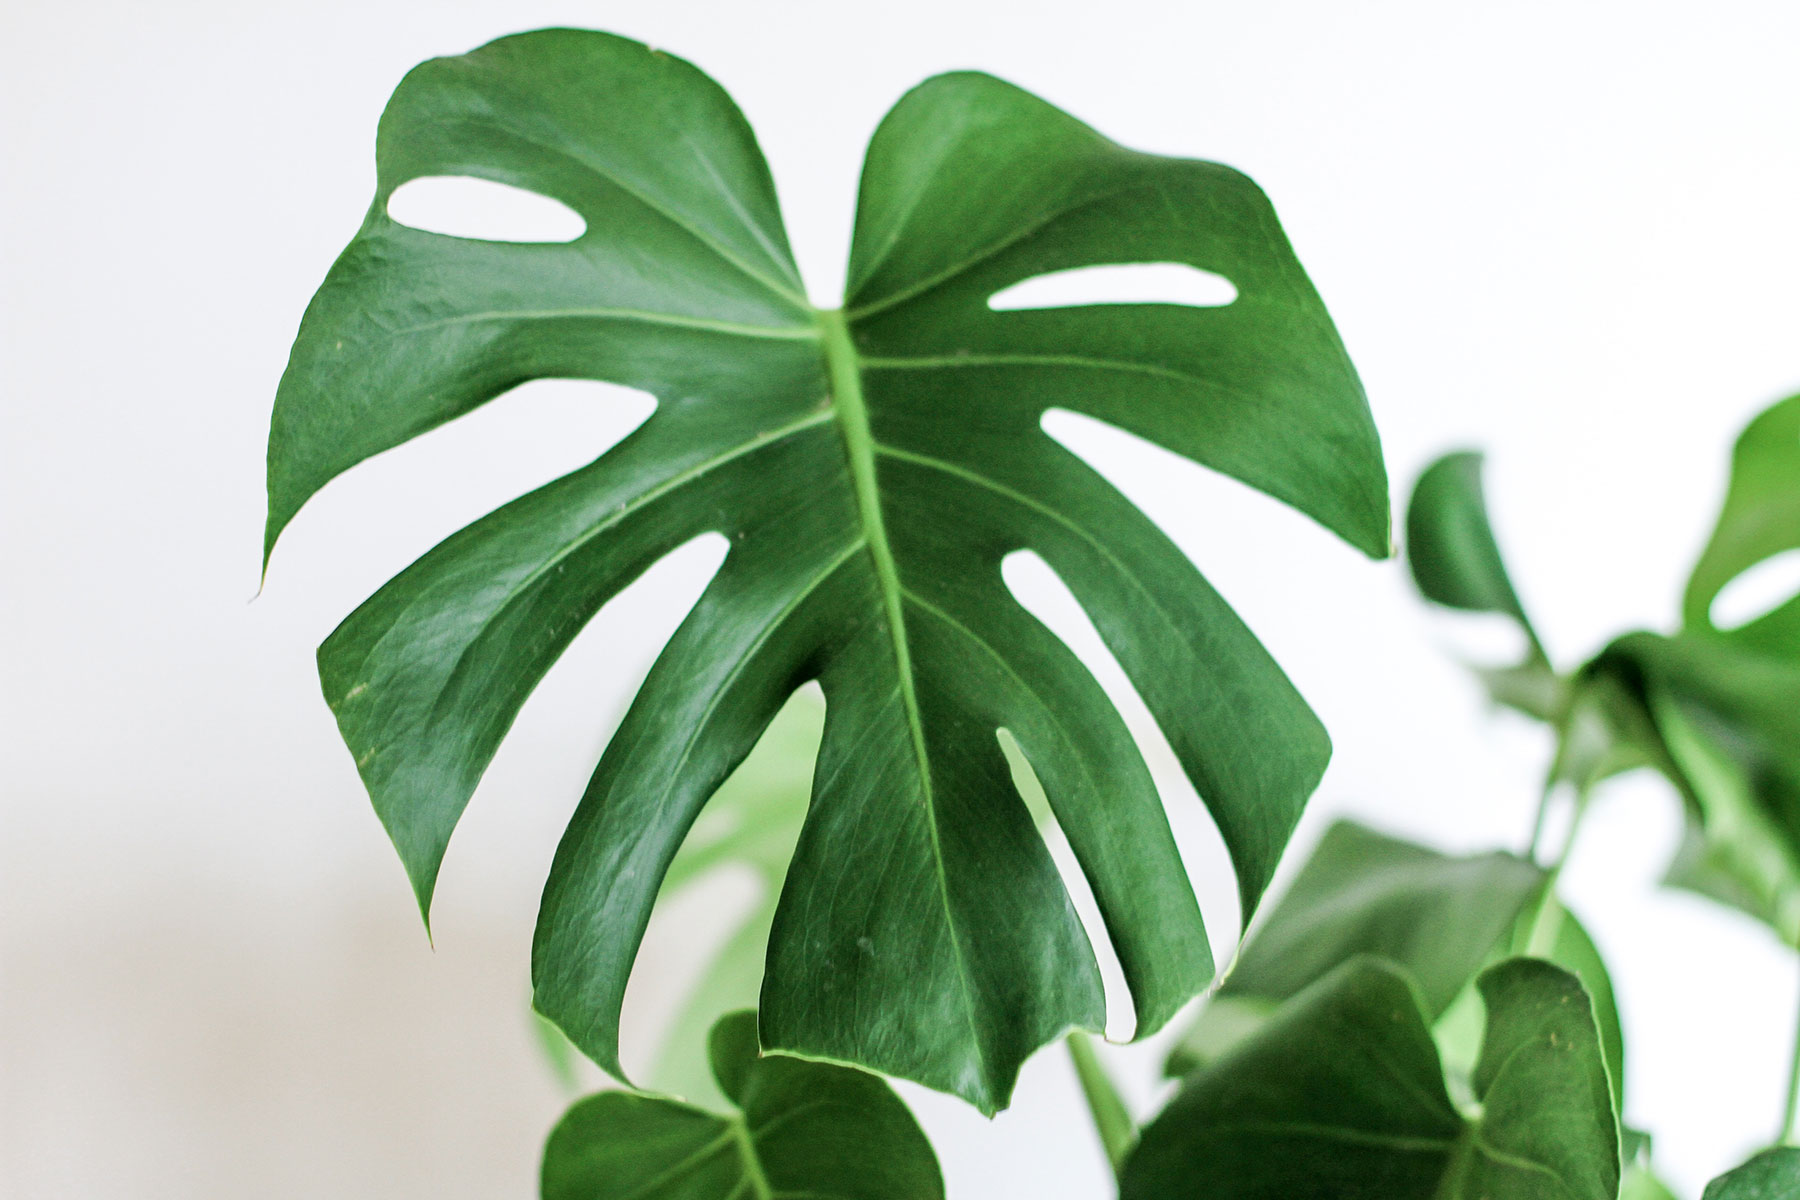 Reception area ideas for your office: Introduce greenery with indoor plants